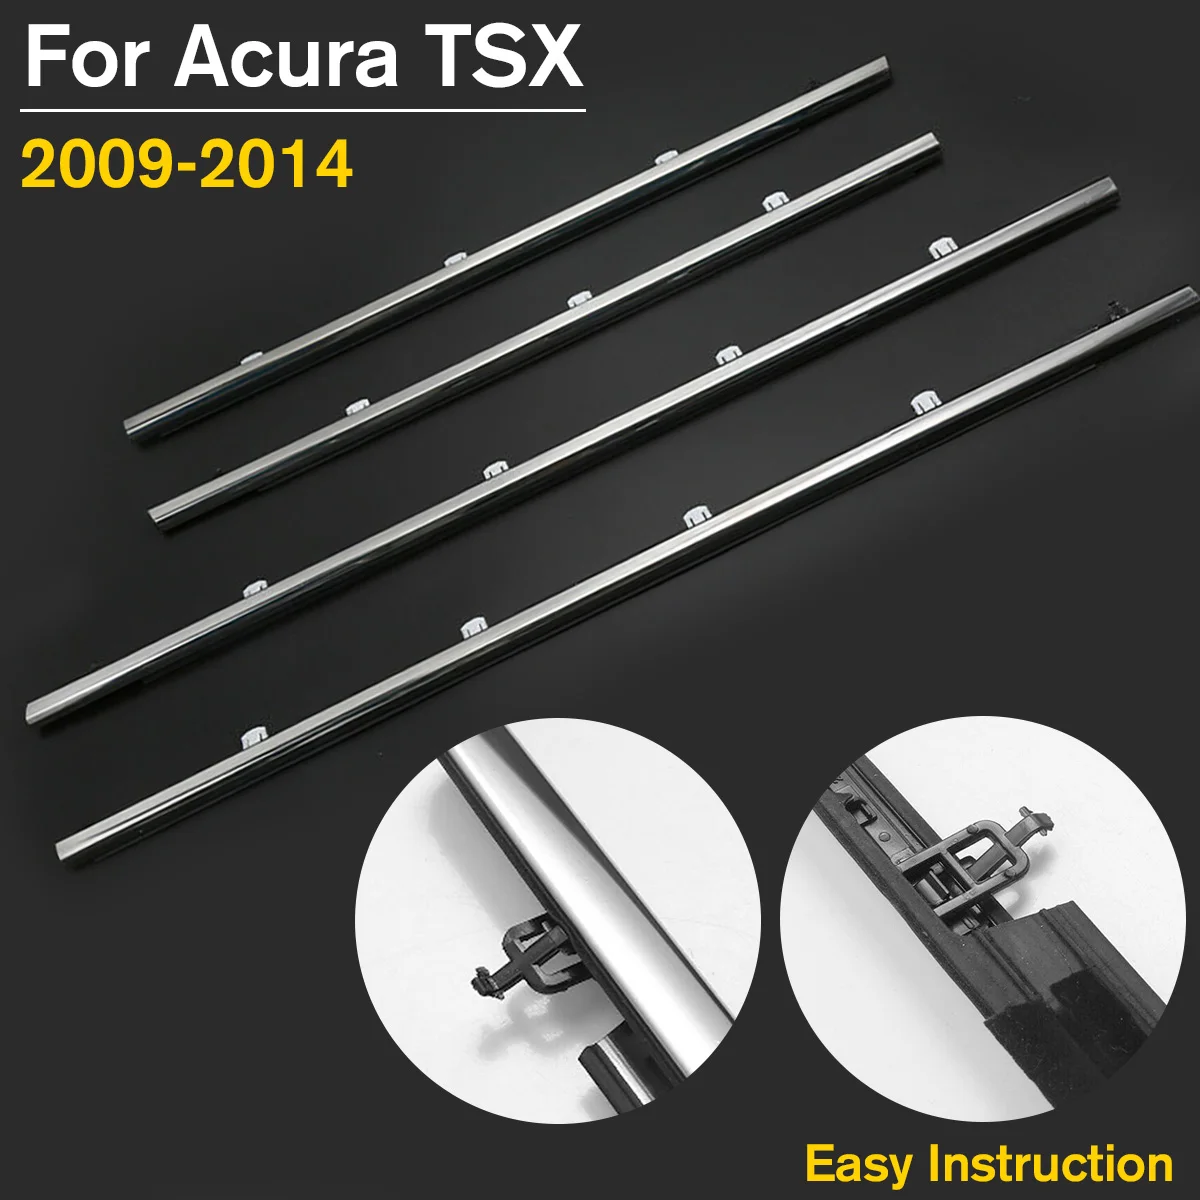 

NEW 4PCS Car Outside Window Moulding Trim Weatherstrip Seal Belt Weather Strip Fit for Acura TSX 2009-2014